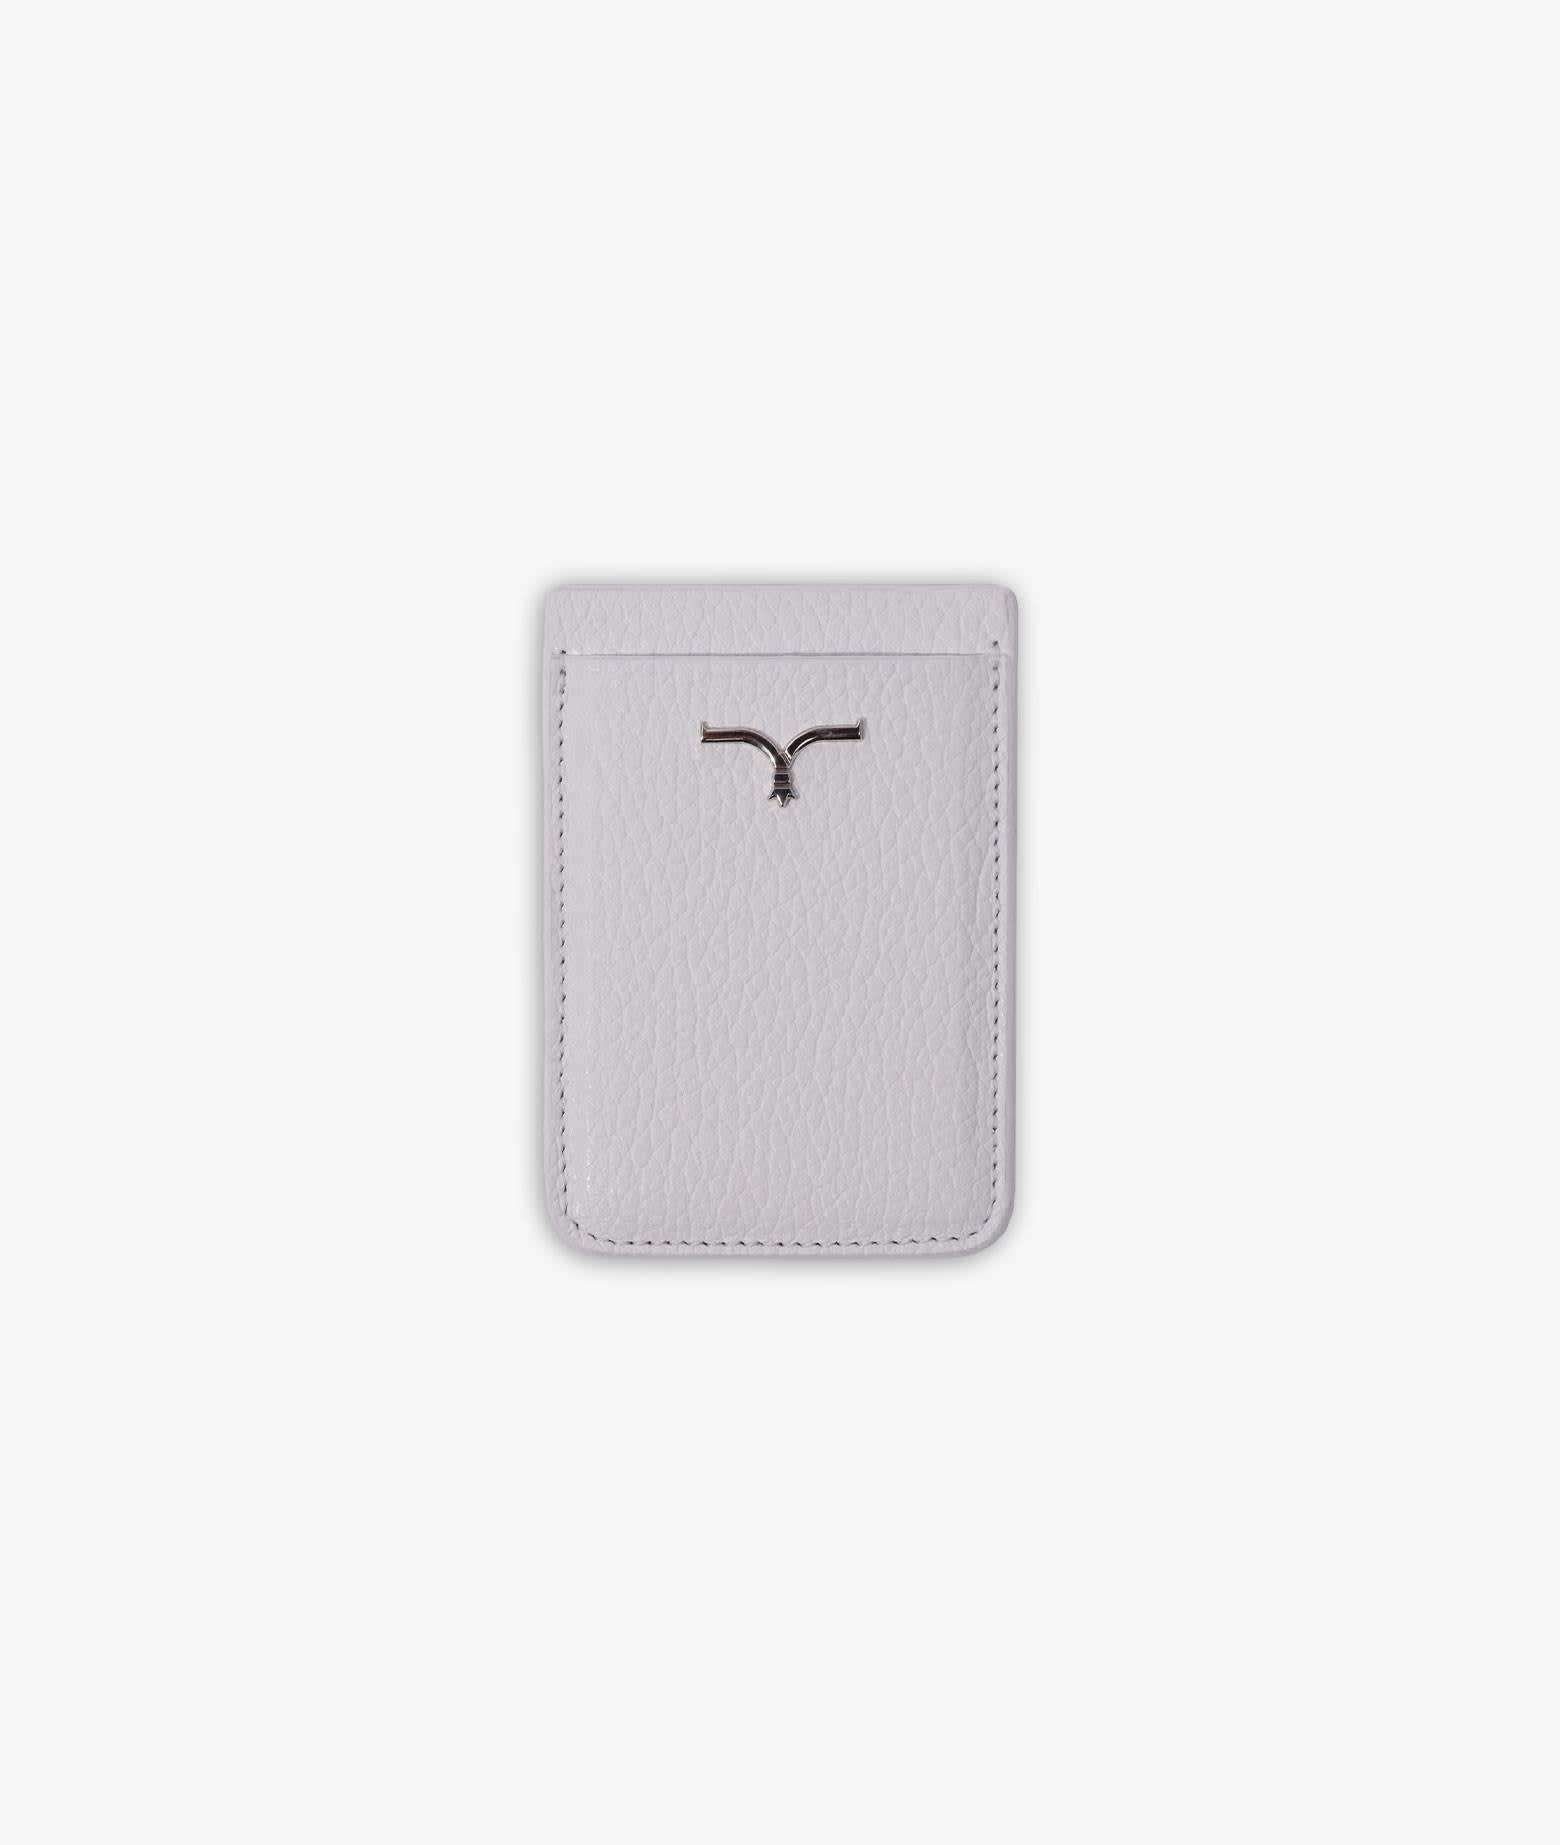 Larusmiani Magnetic Credit Card Holder For Iphone Accessory In White